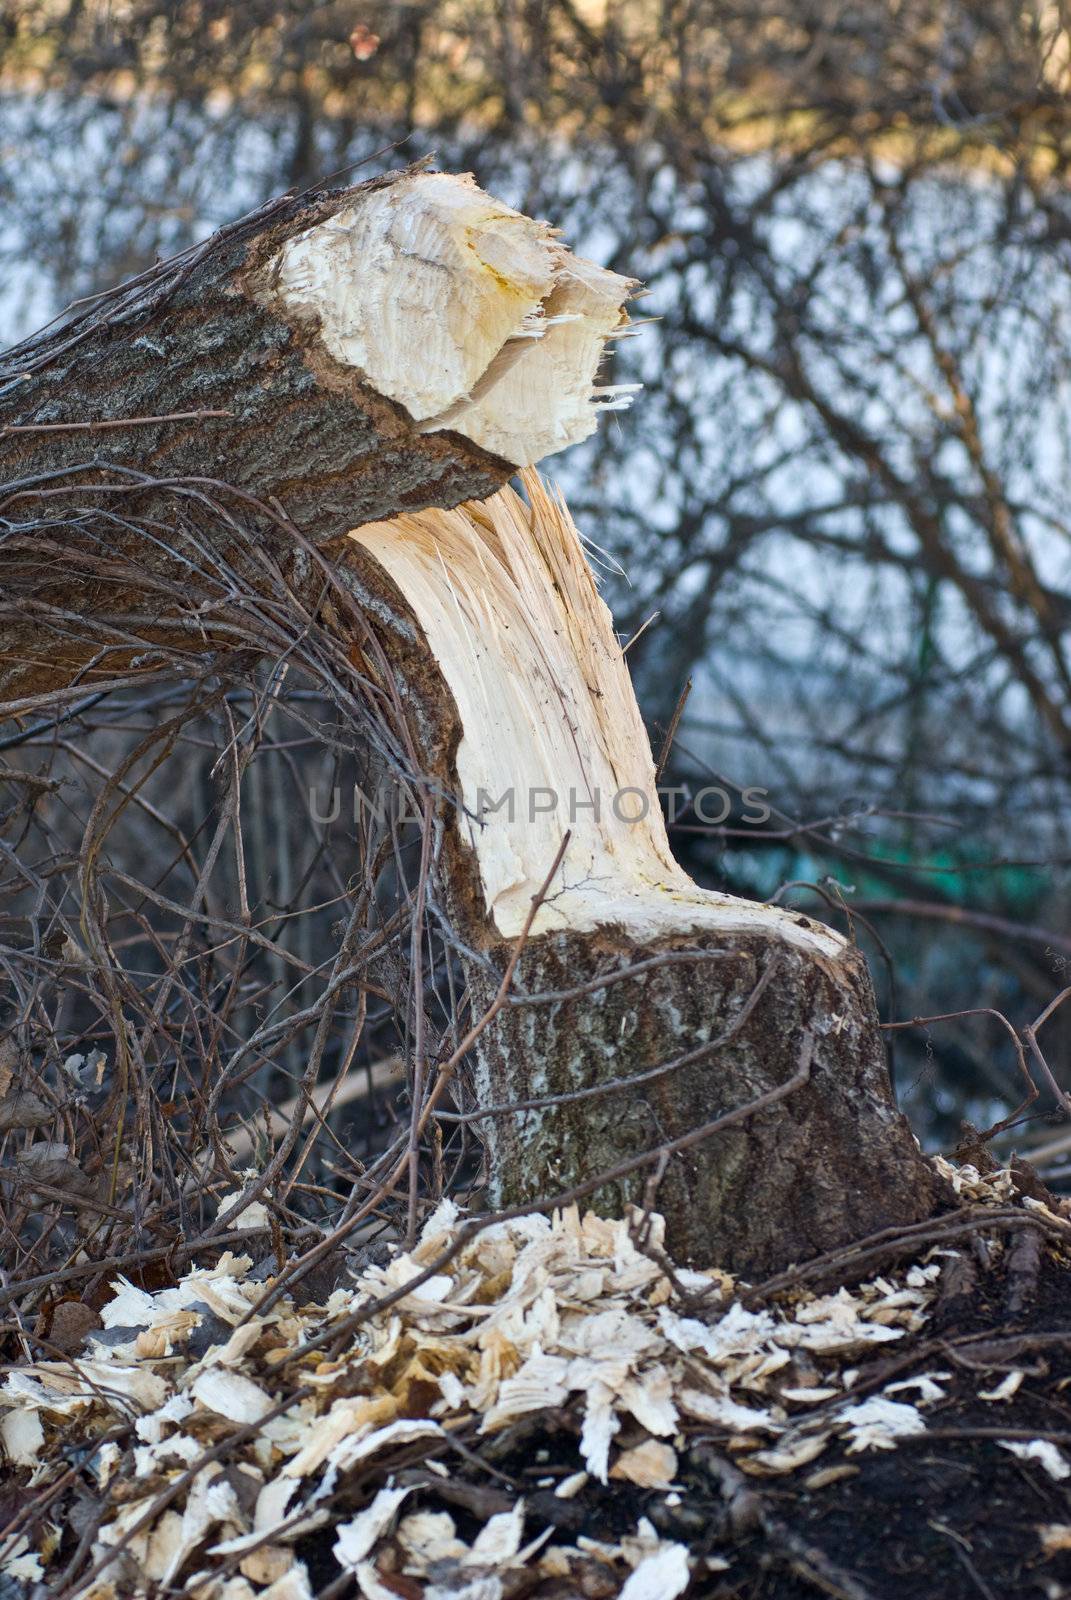 a tree heavily cropped of by beavers with wood shavings around the tree